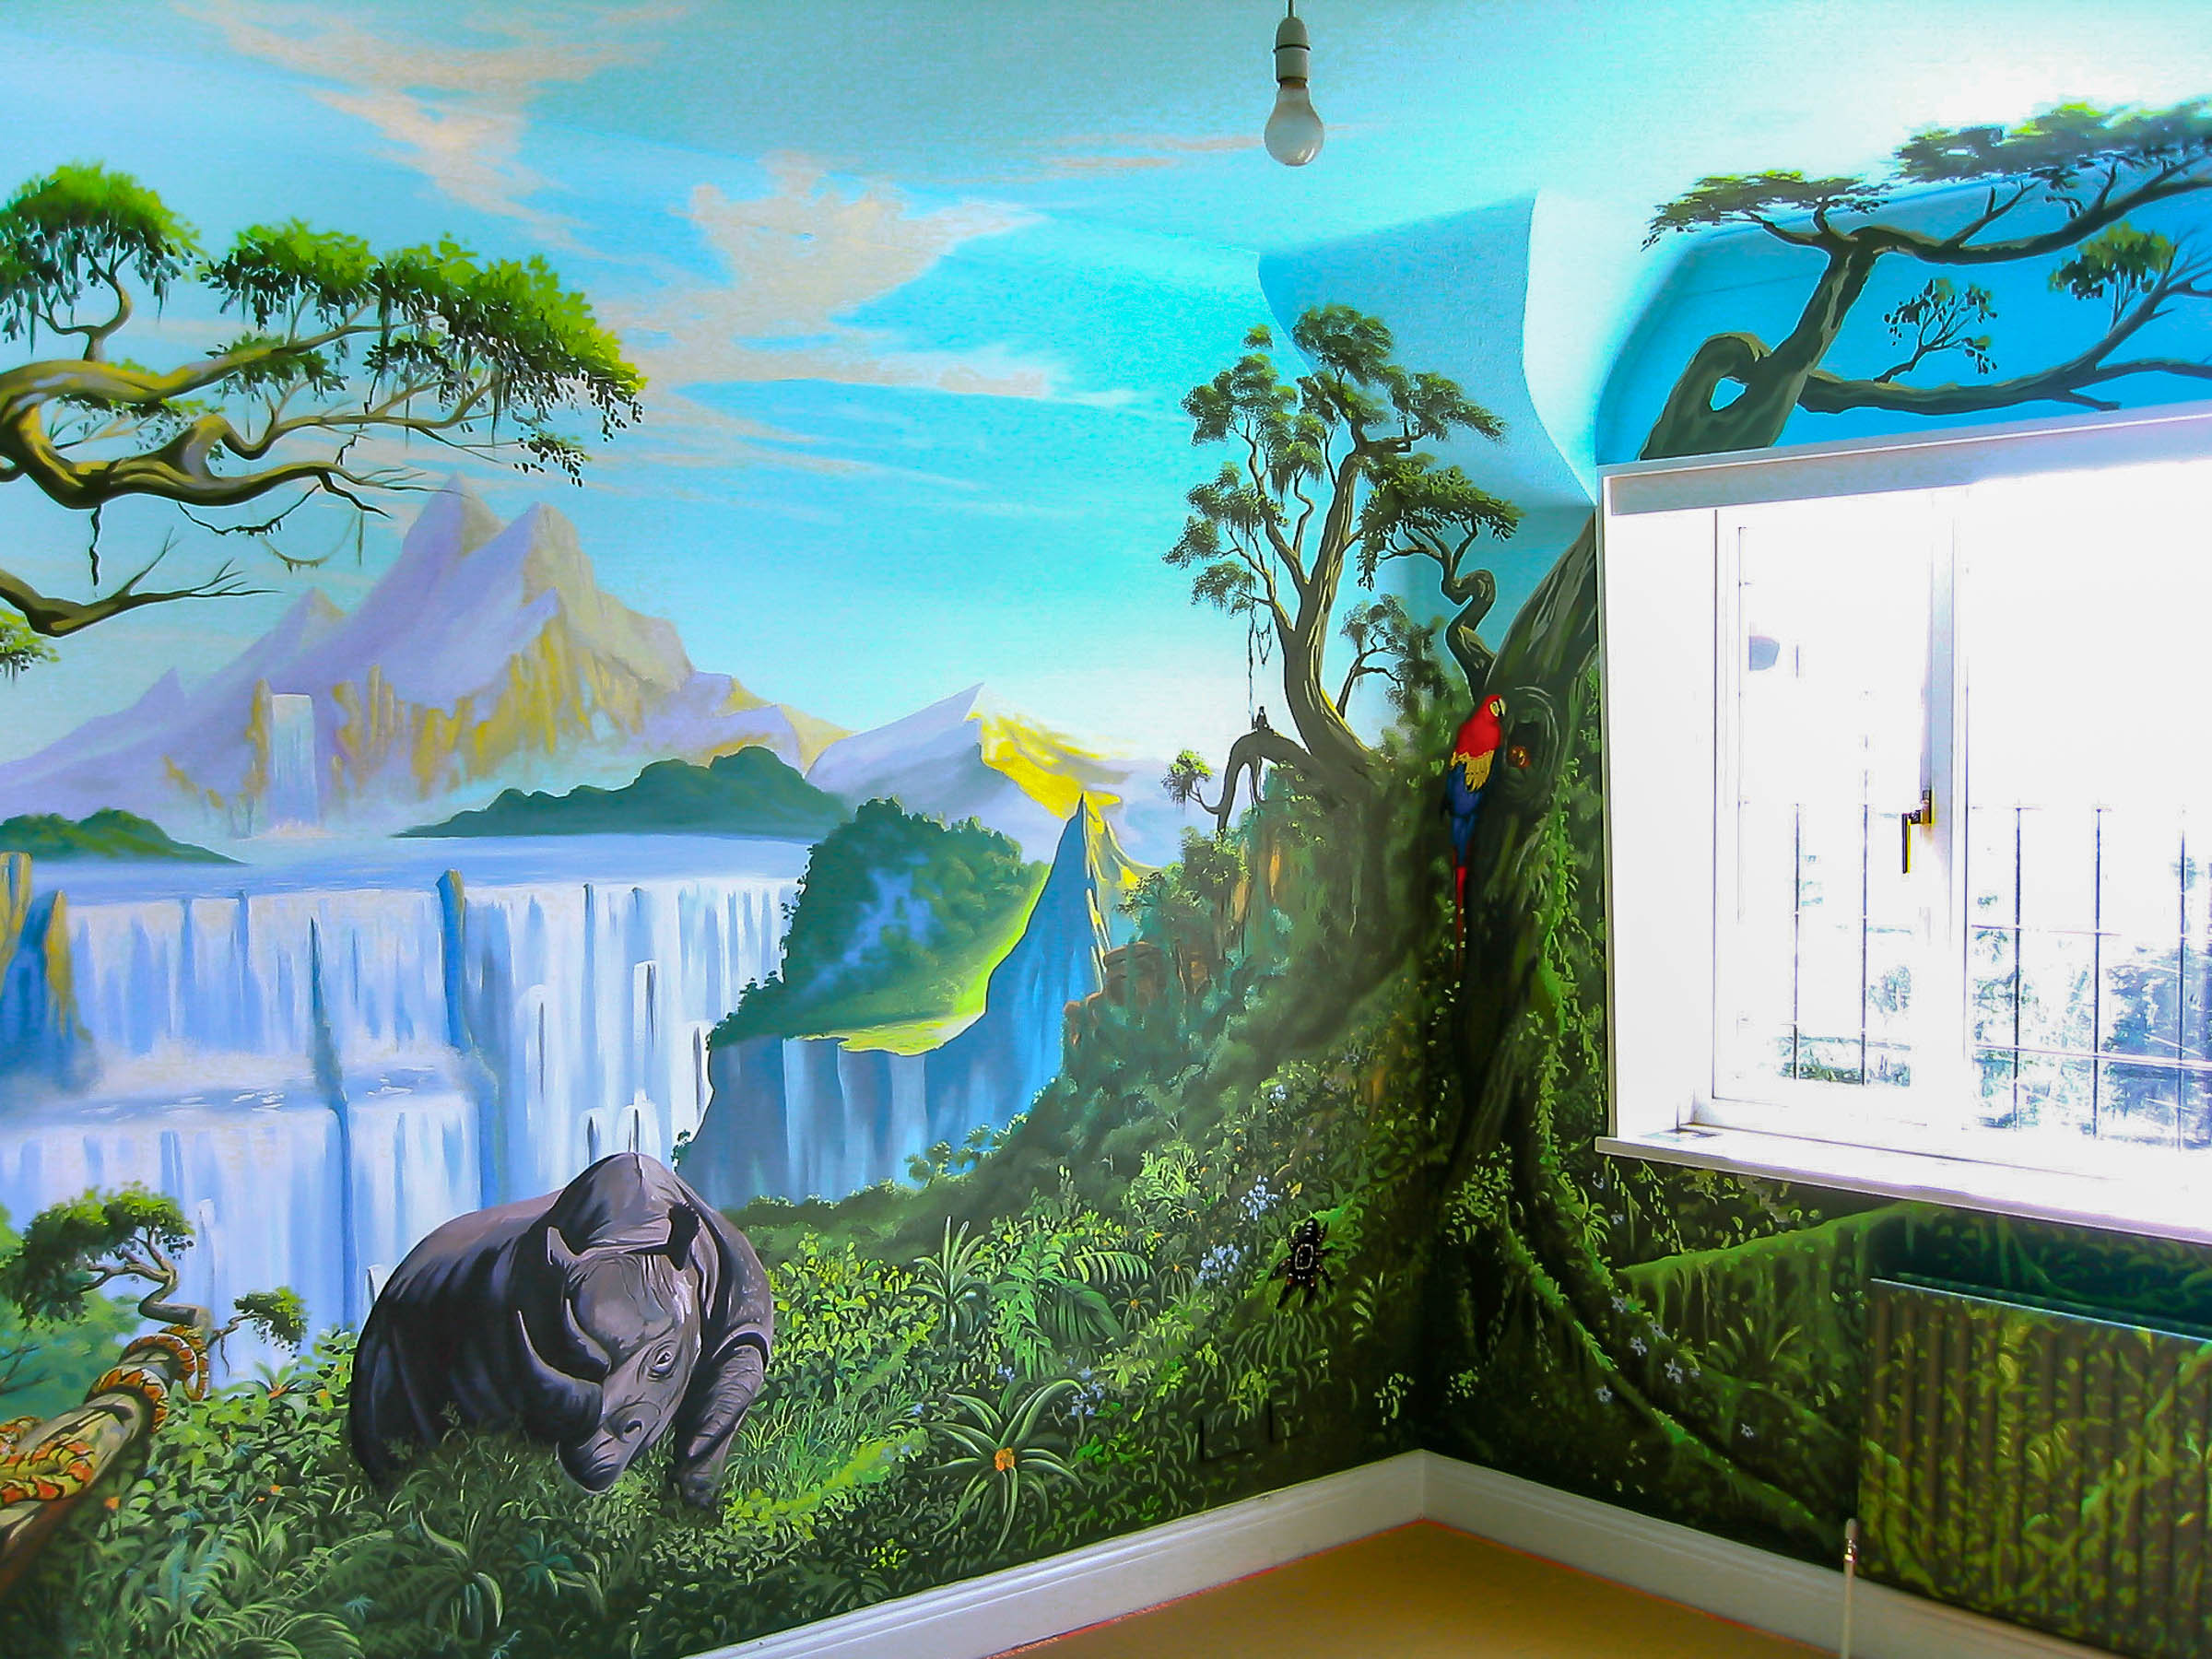 Jungle Wall Mural showing the "parrot" corner